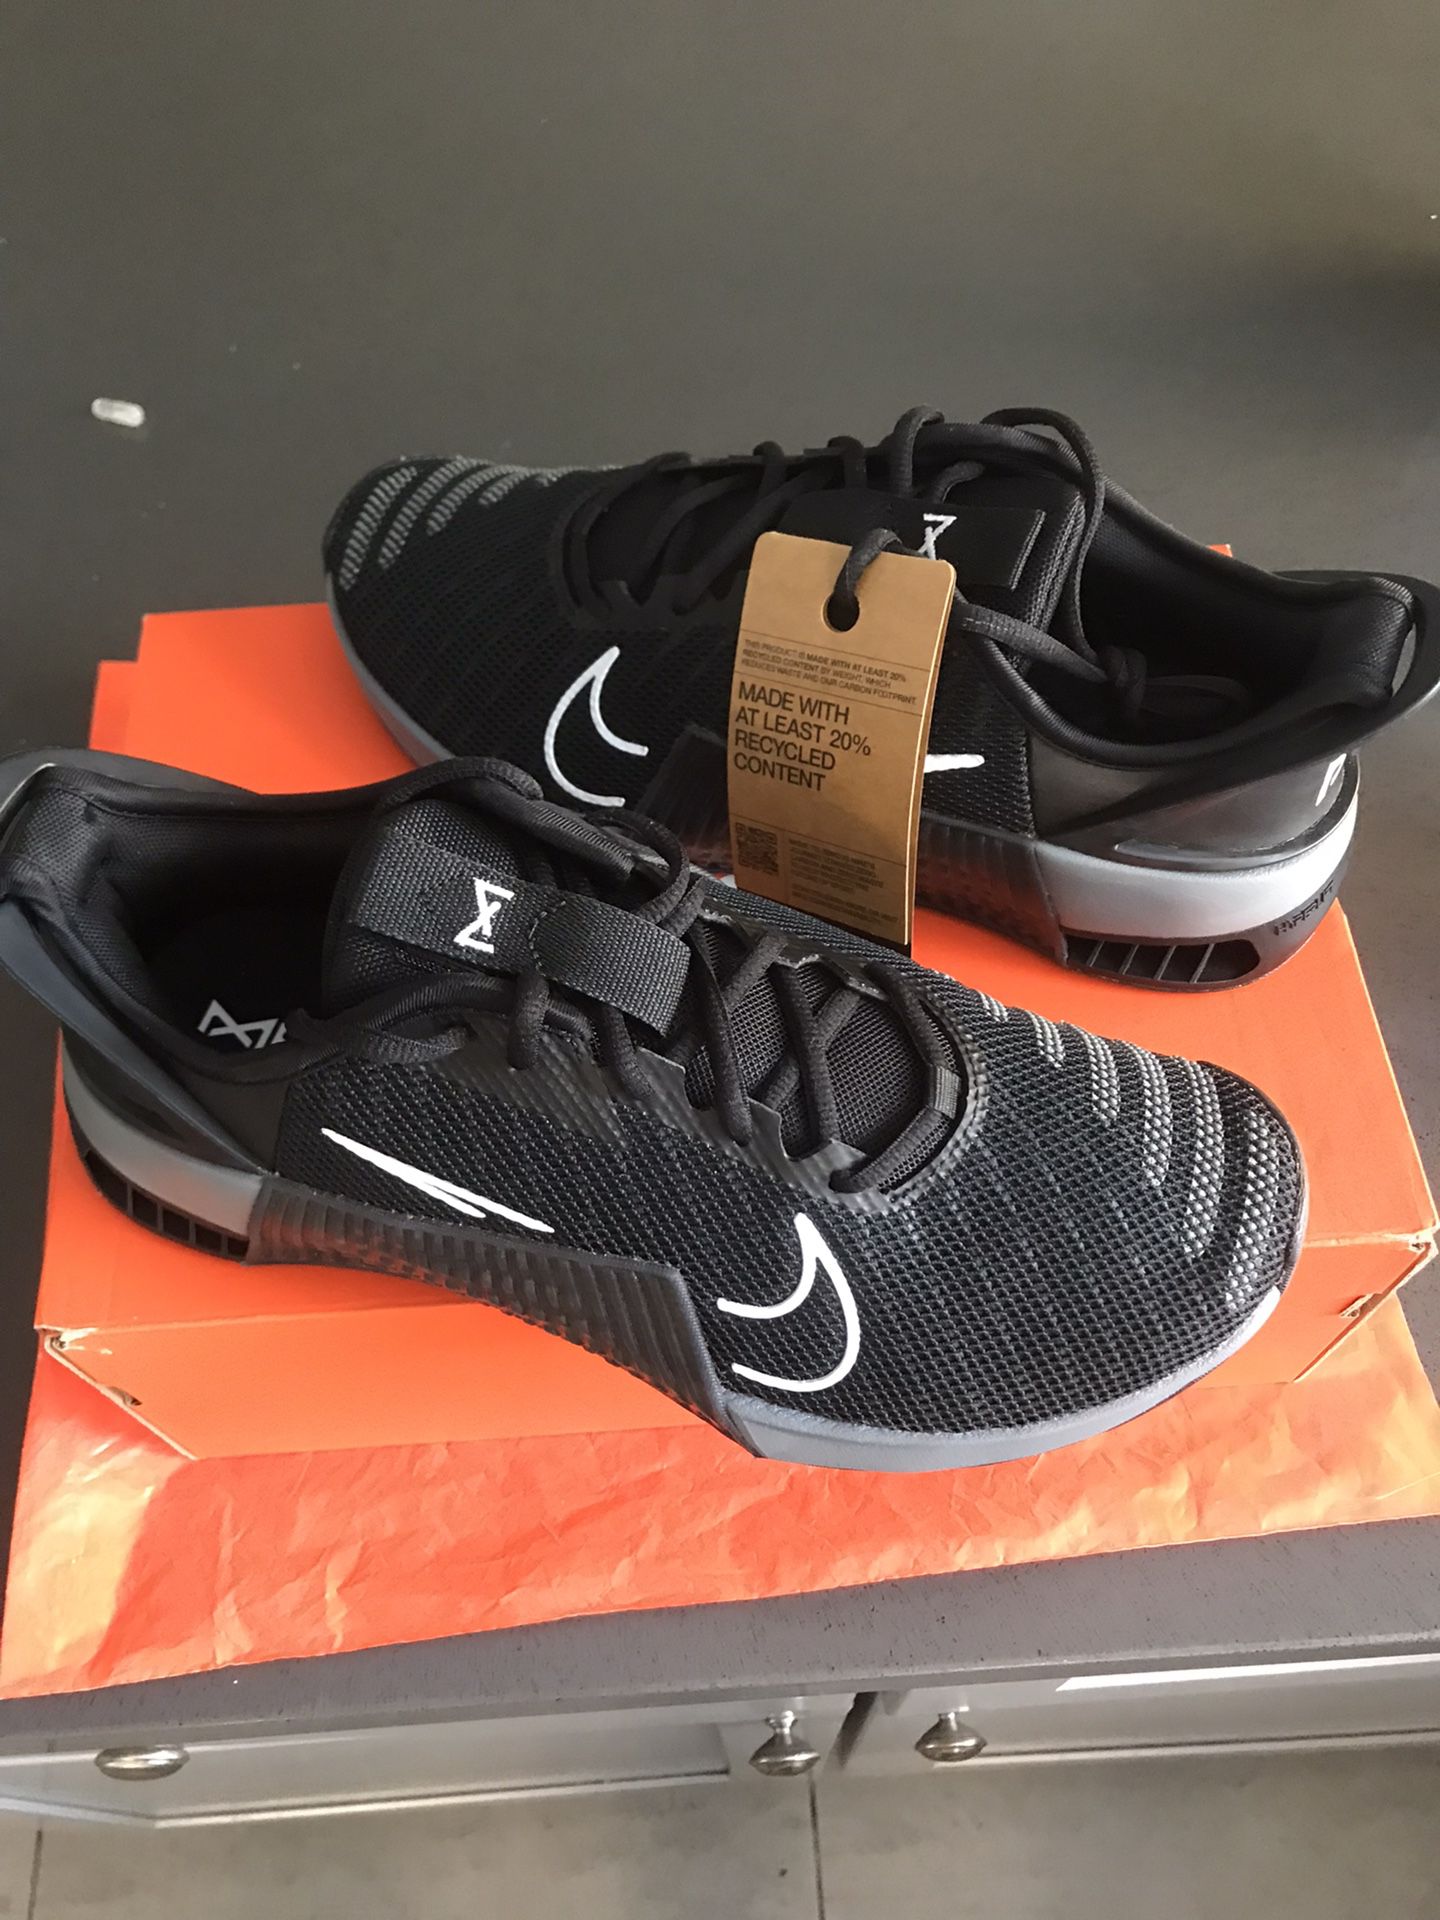 New Nike Metcon 9 Size 9.5 for Sale in Fullerton, - OfferUp